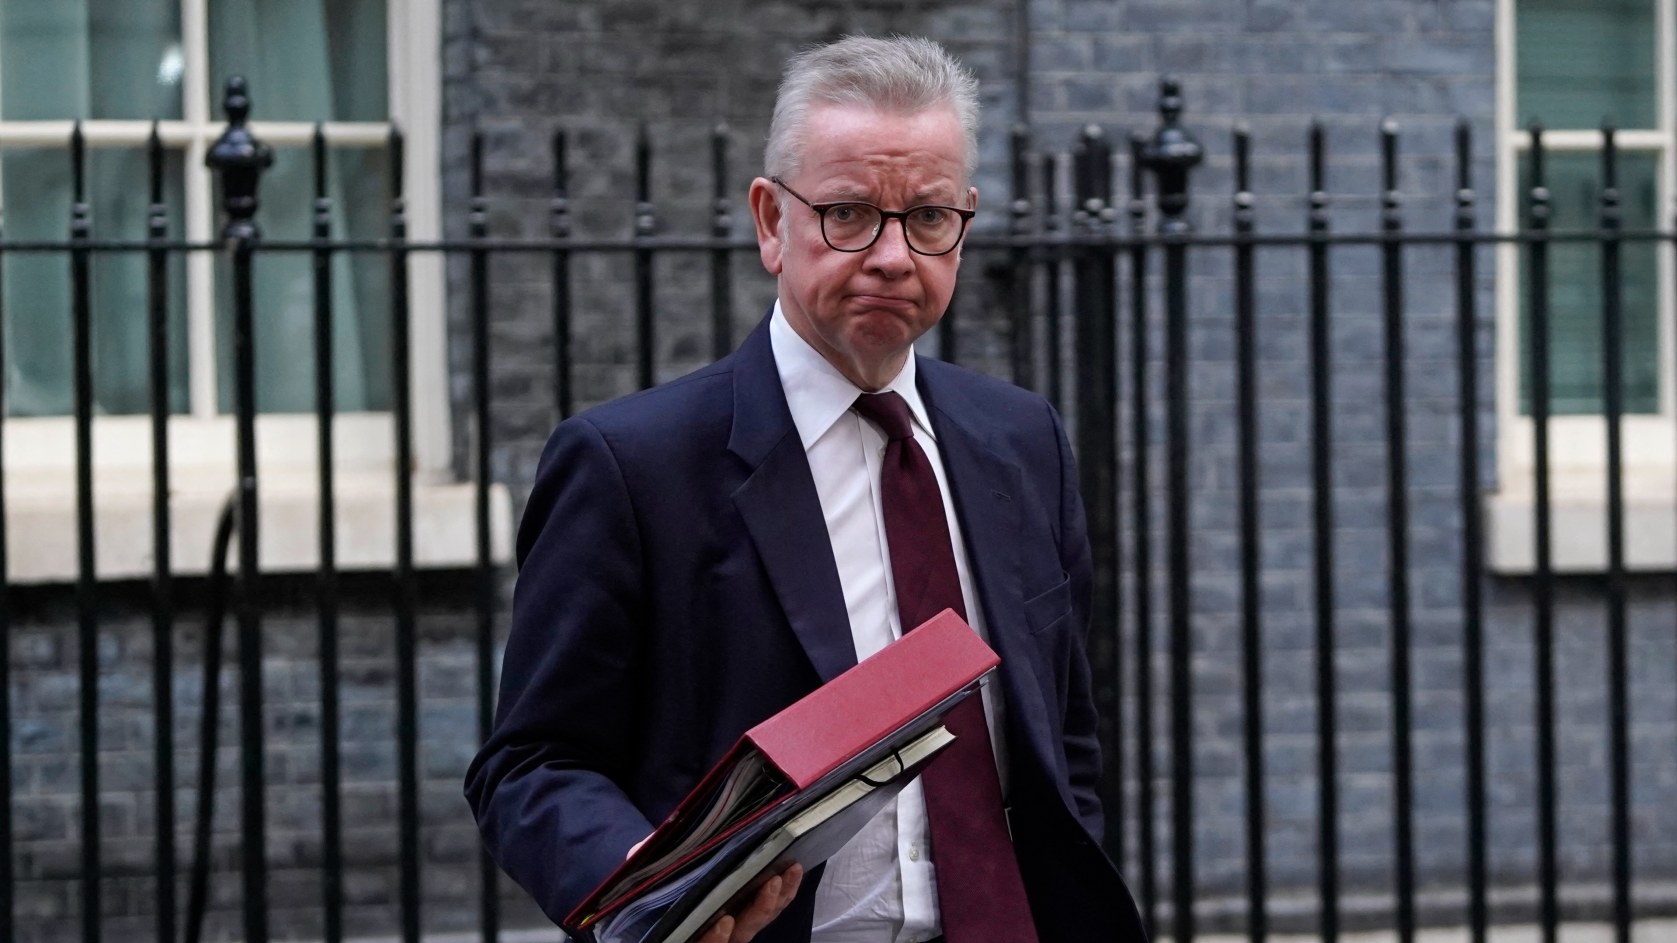 Communities minister Michael Gove's bill was criticised in a legal opinion on Monday as "deeply troubling" (AFP)